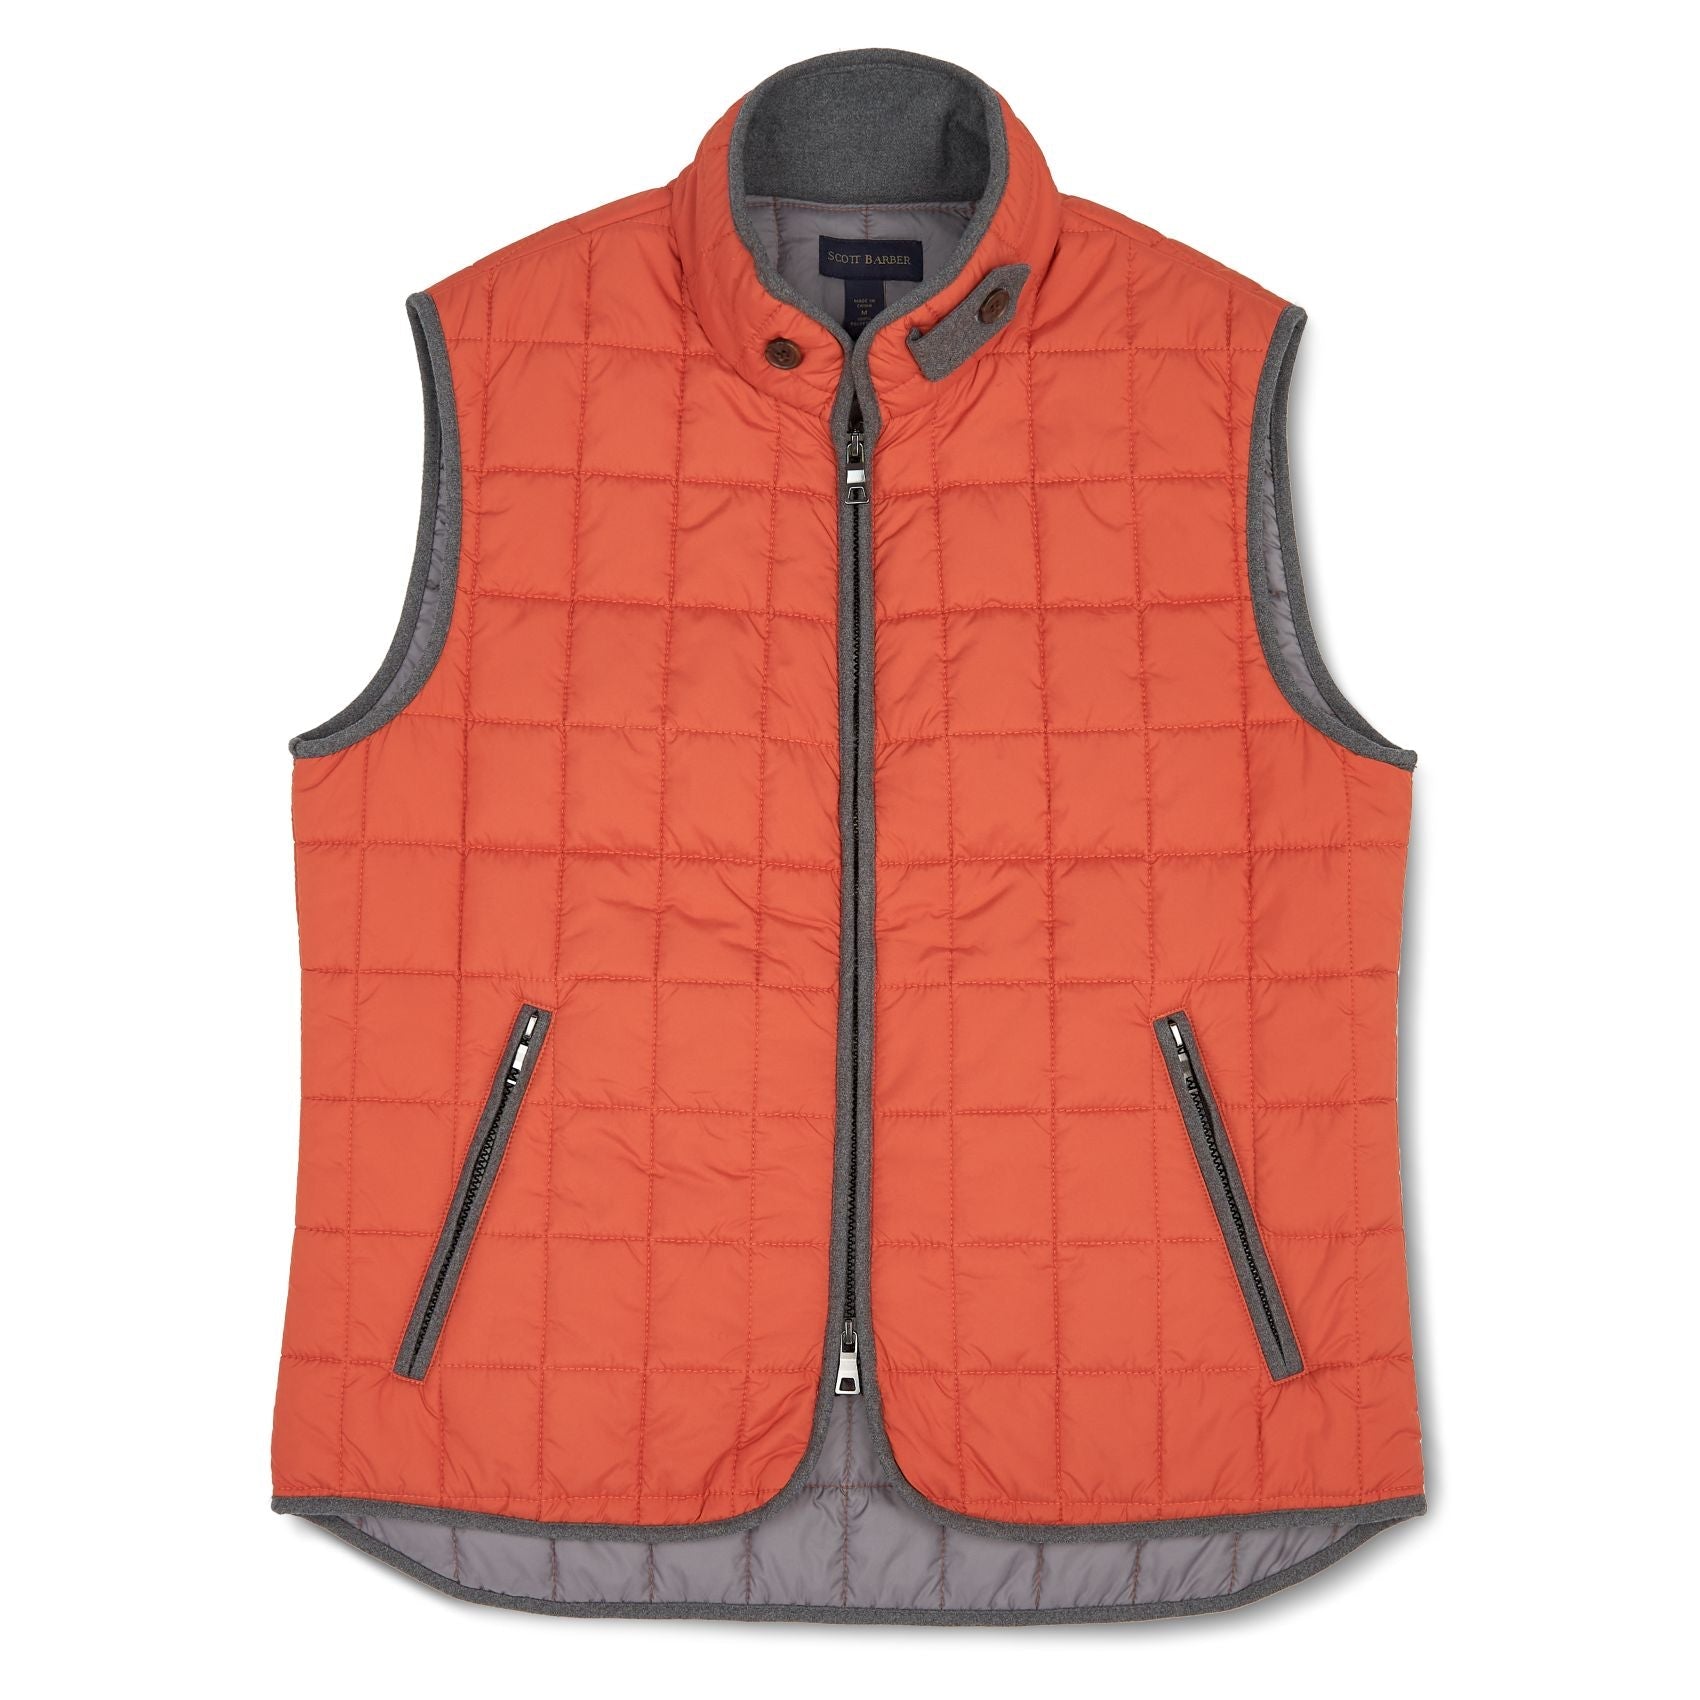 Quilted Water-Resistant Puffer Vest in Ochre (Size Medium) by Scott Barber